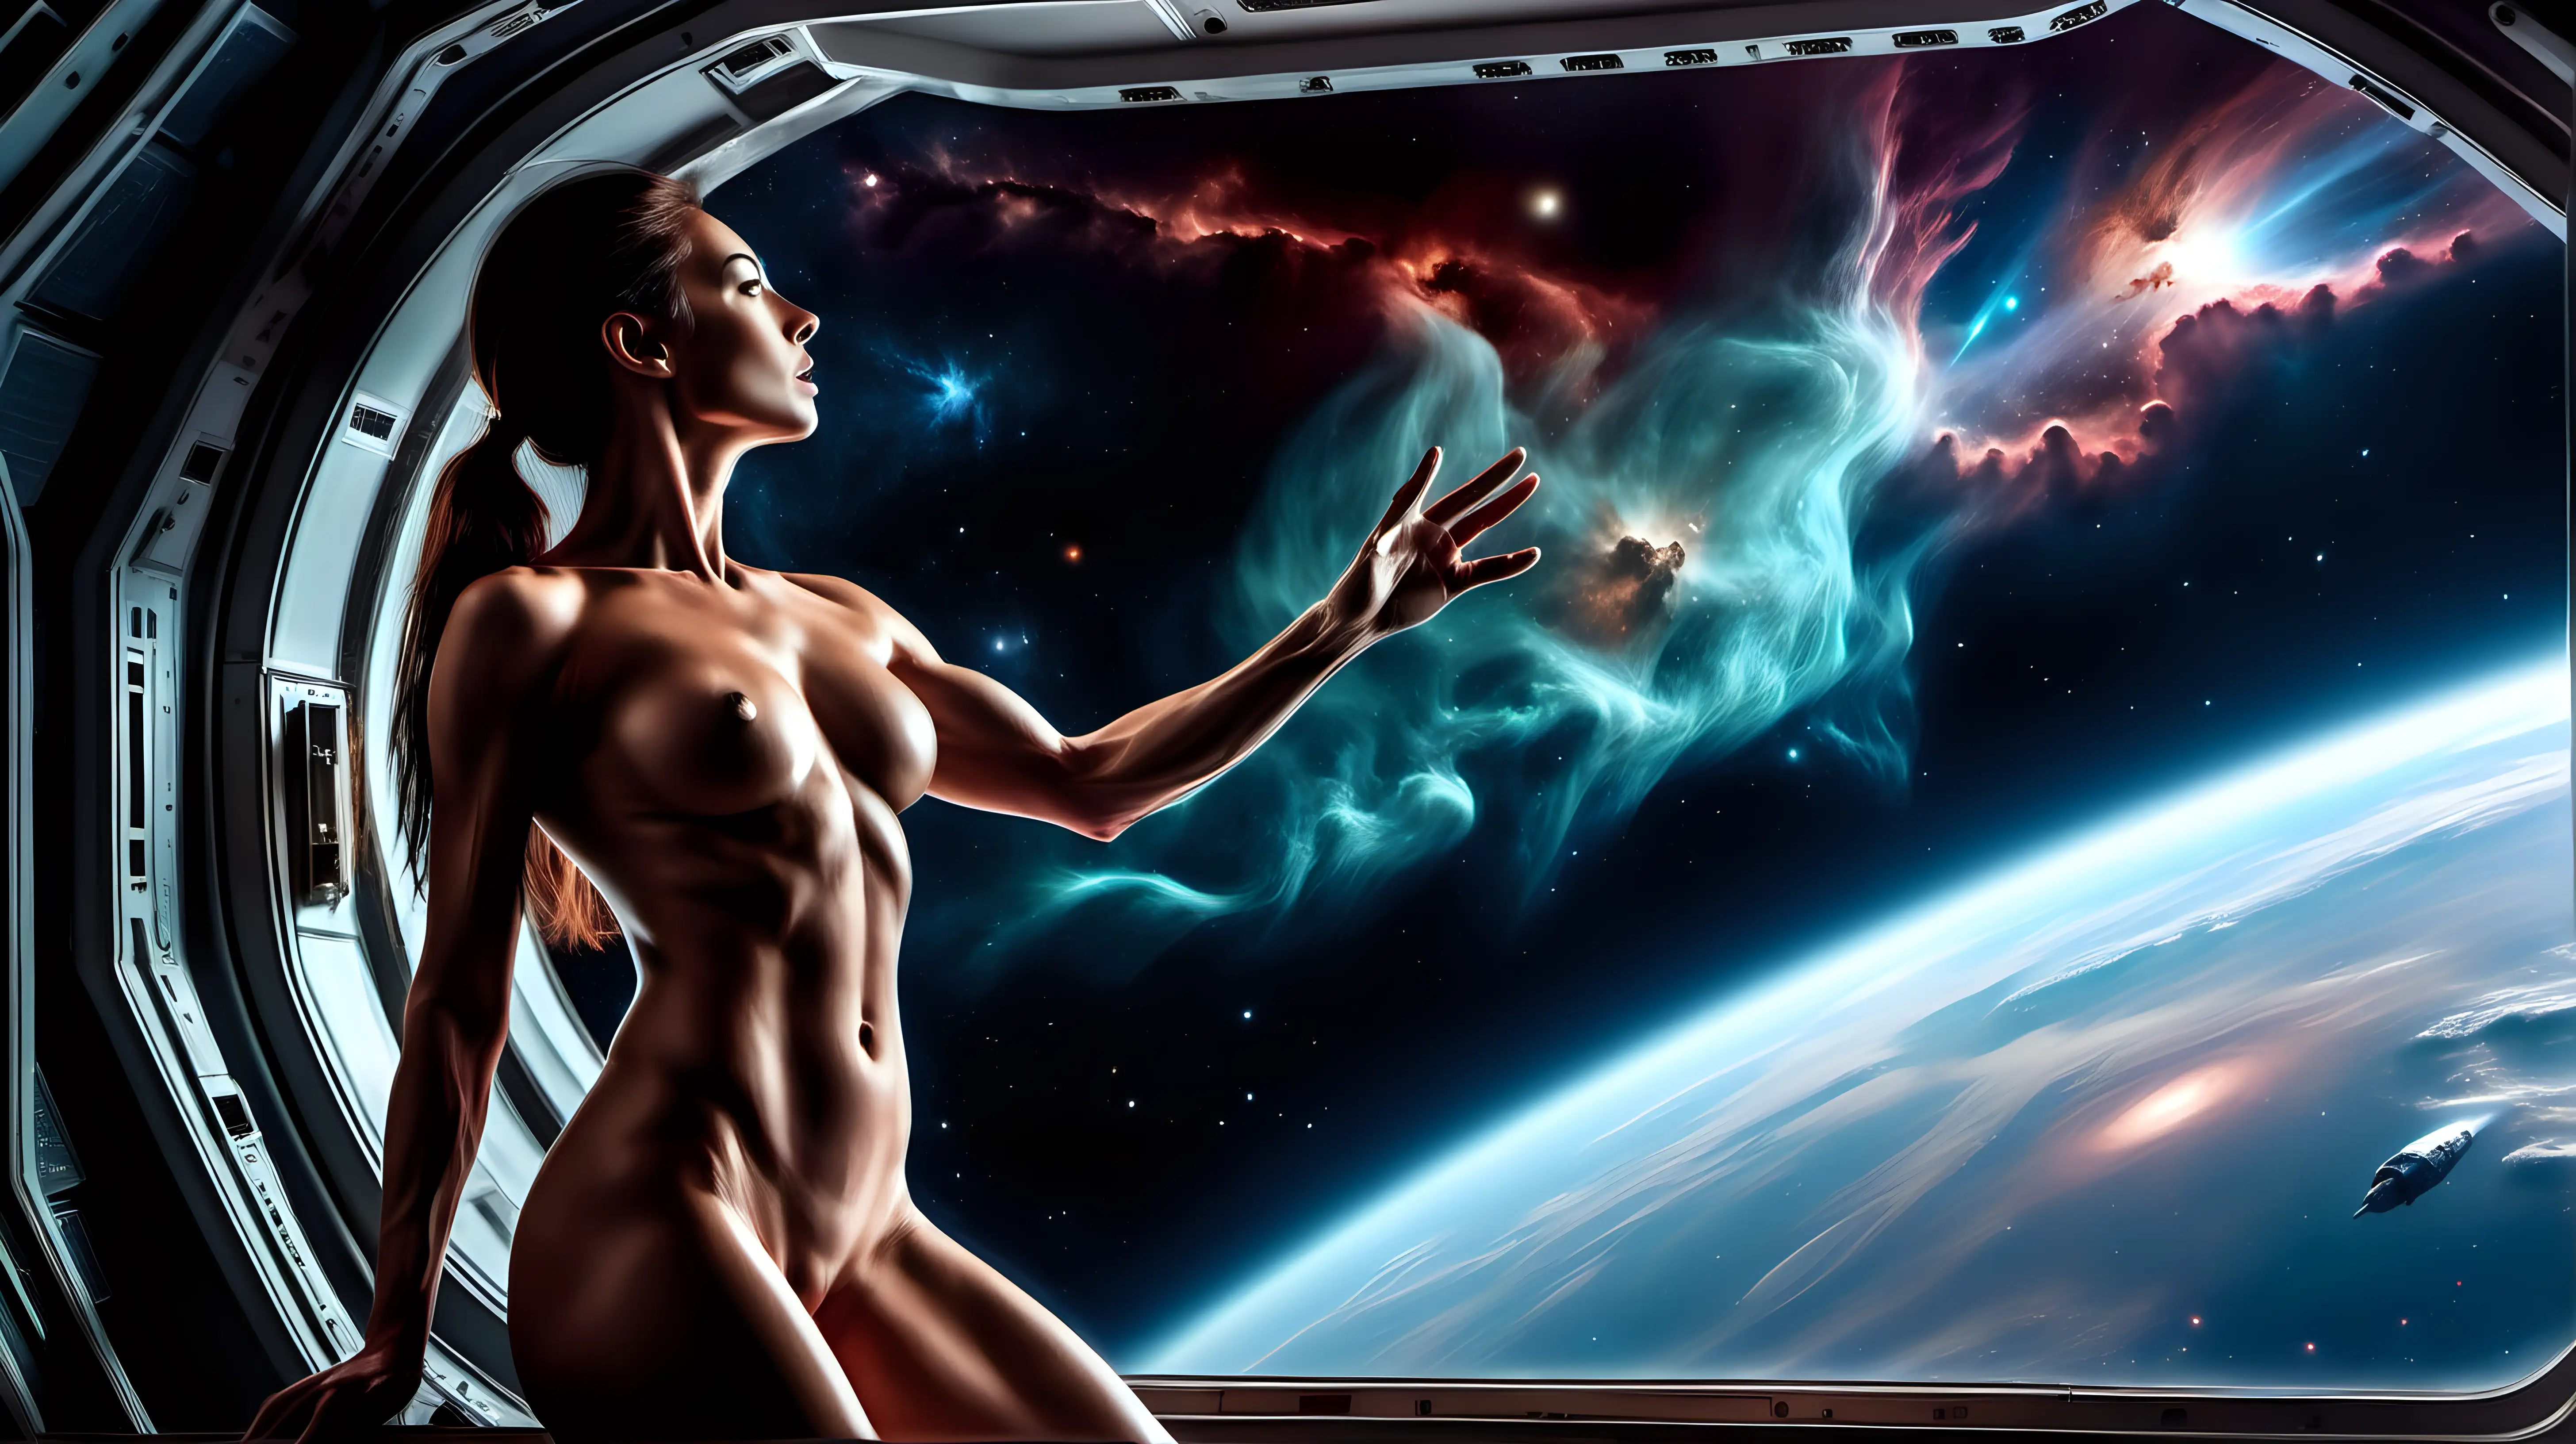 naked muscular woman on a spaceship, visor, no gravity, watching nebula from window